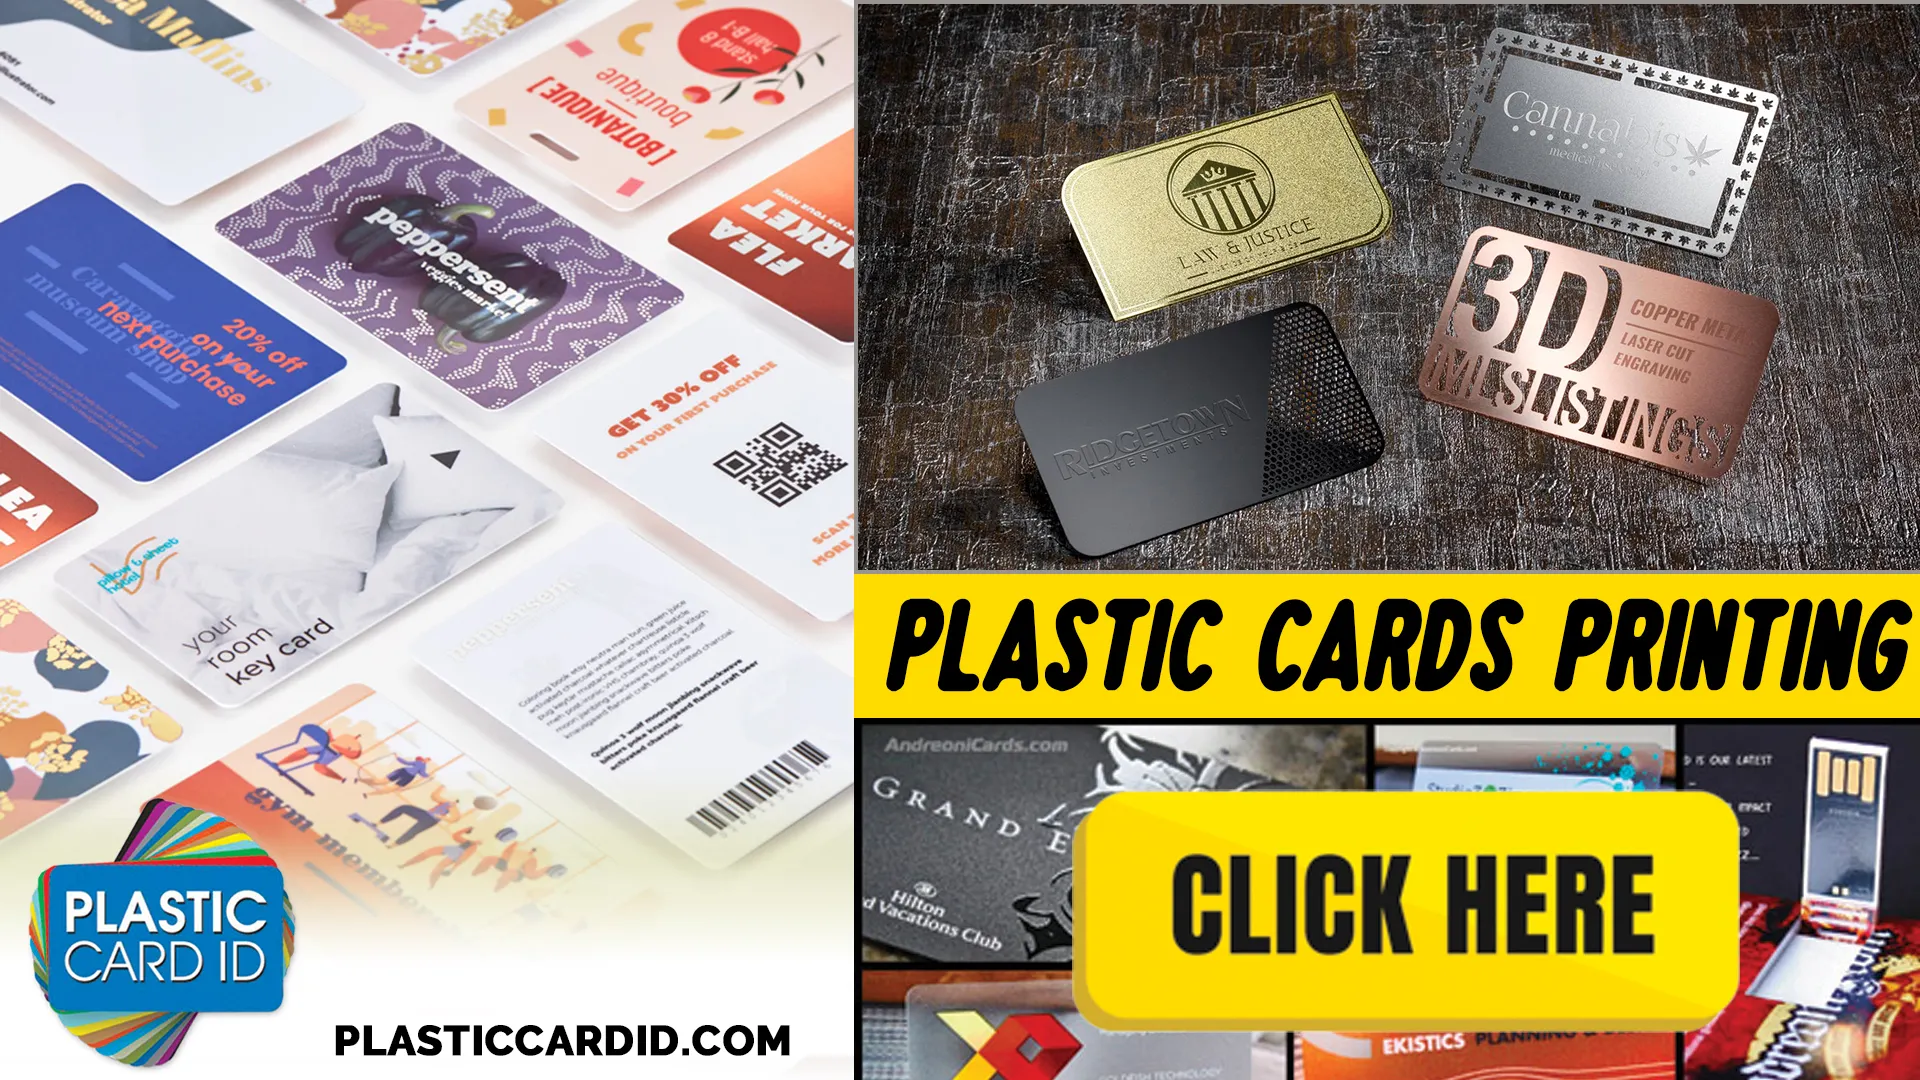 Common Problems With Plastic Card Printers and Their Solutions